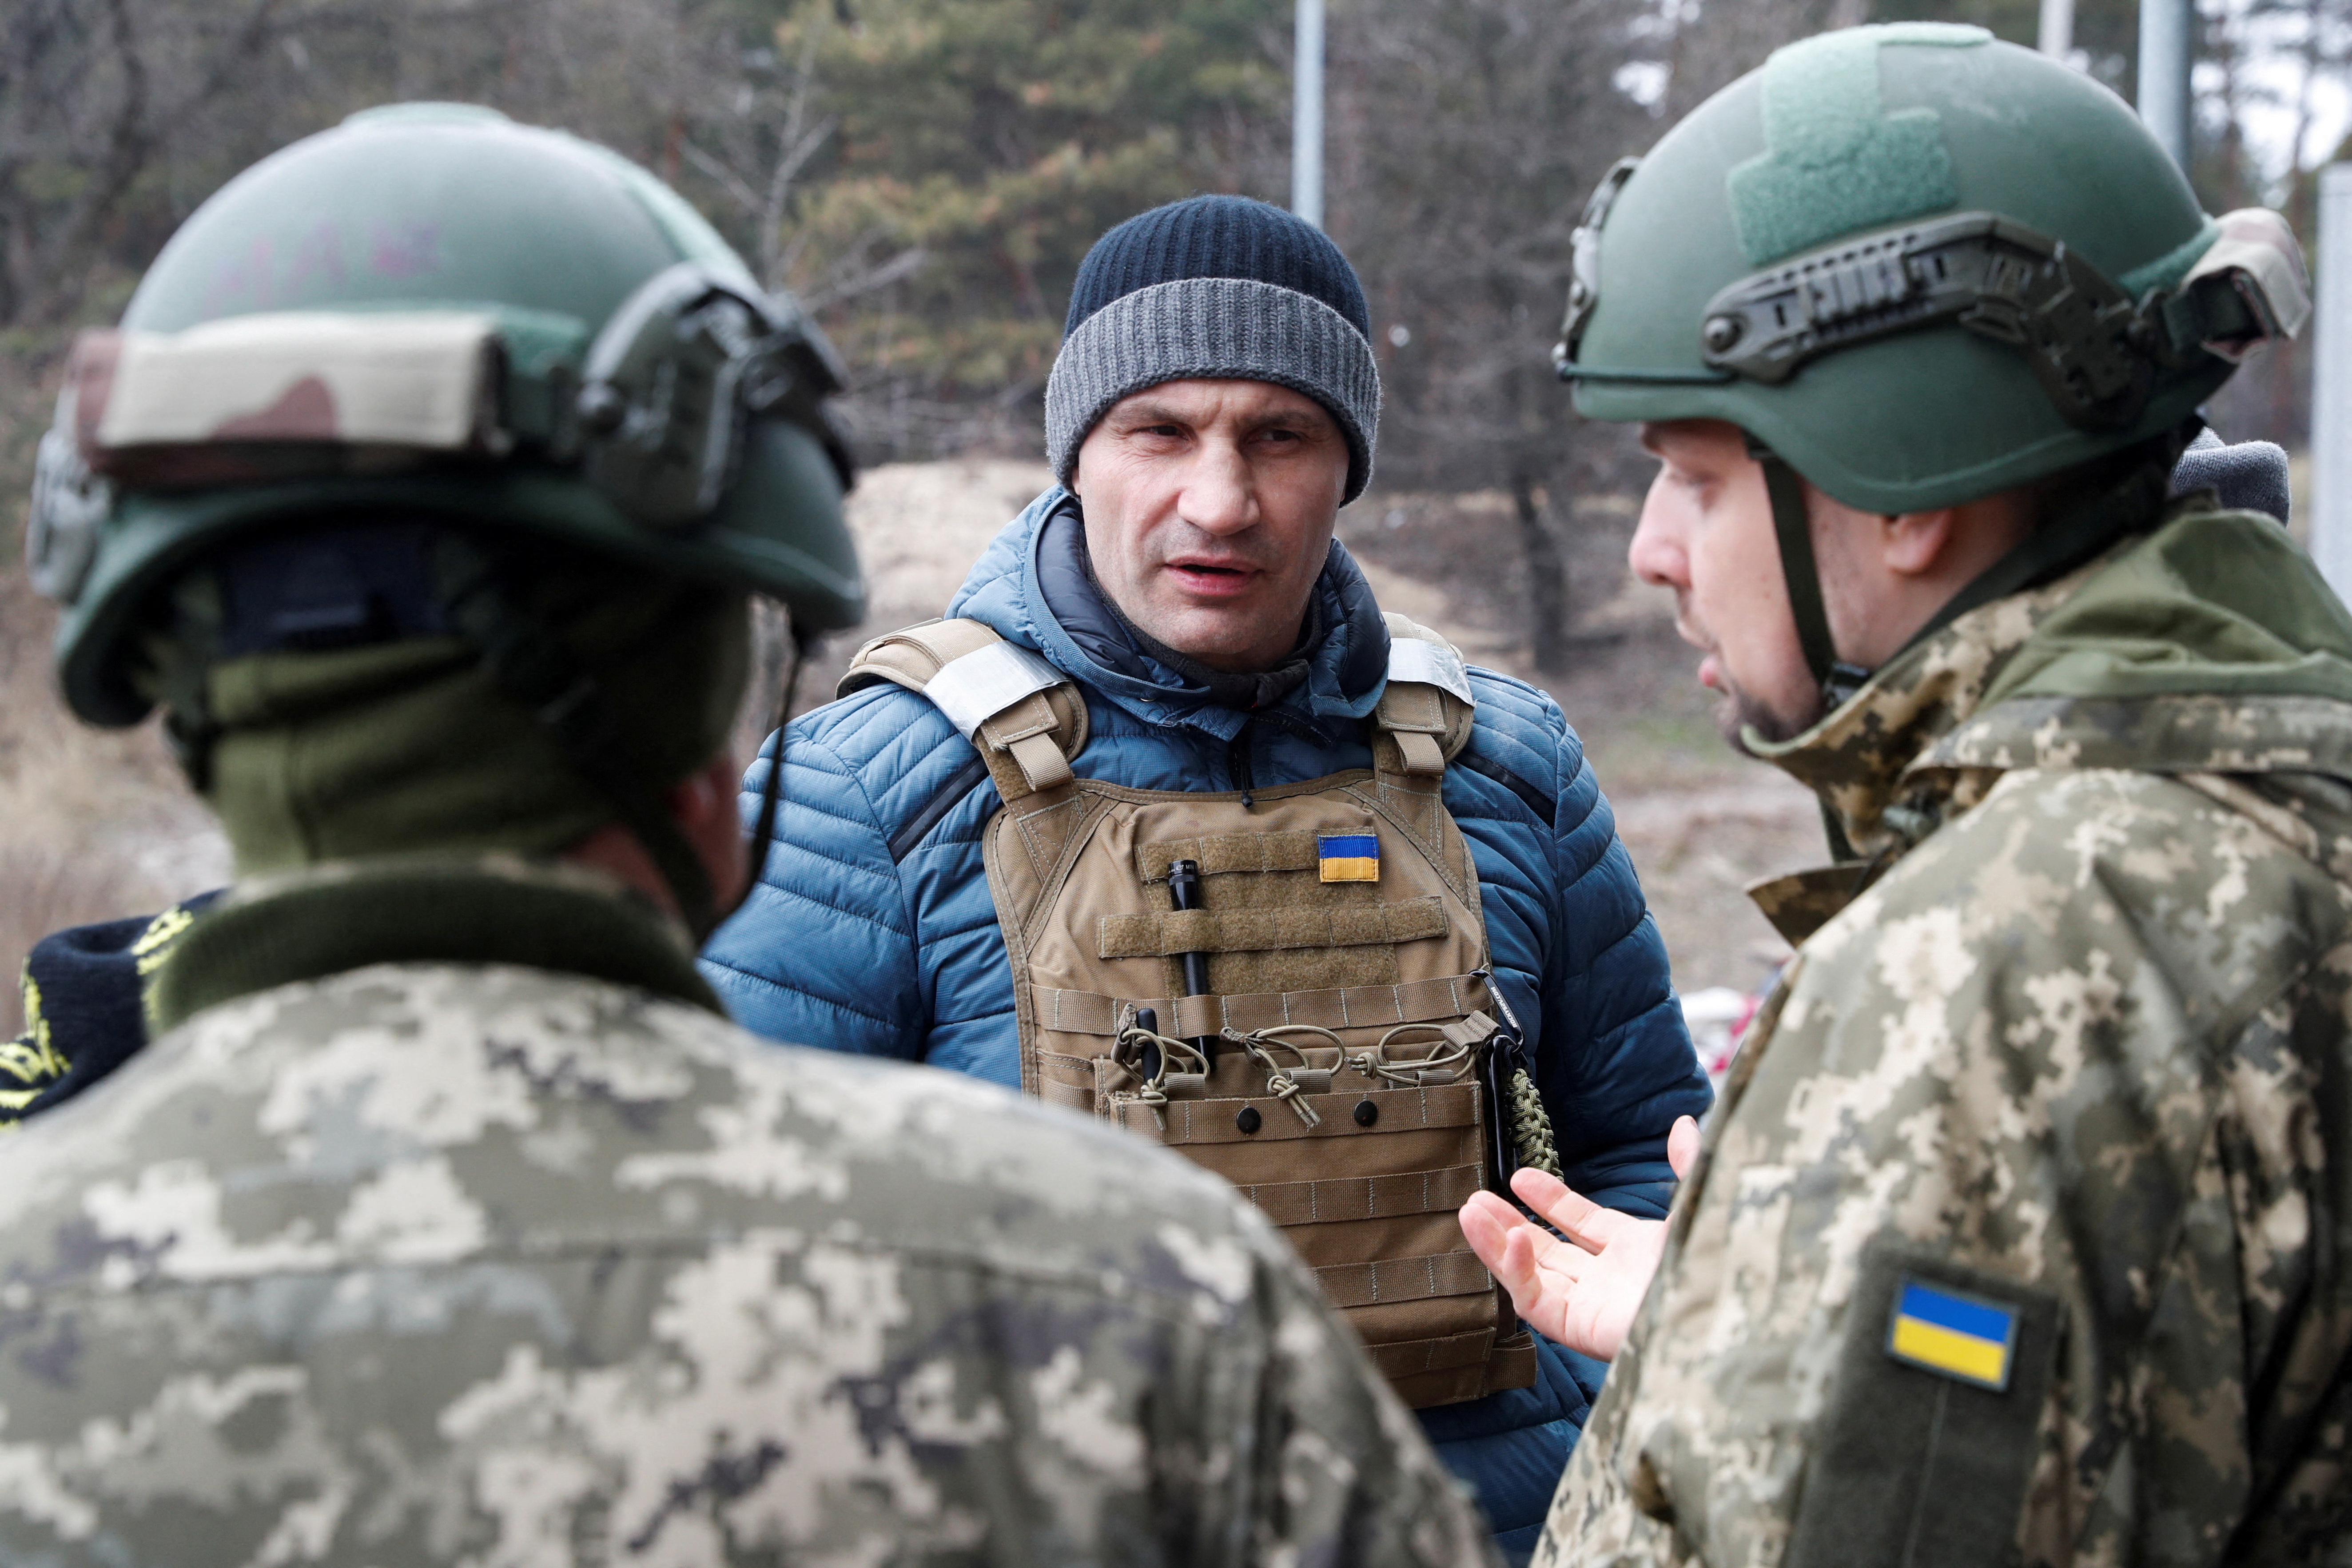 FILE PHOTO: Mayor of Kyiv Vitali Klitschko visits a checkpoint of the Ukrainian Territorial Defence Forces, as Russia's invasion of Ukraine continues, in Kyiv, Ukraine March 6, 2022. REUTERS/Valentyn Ogirenko/File Photo